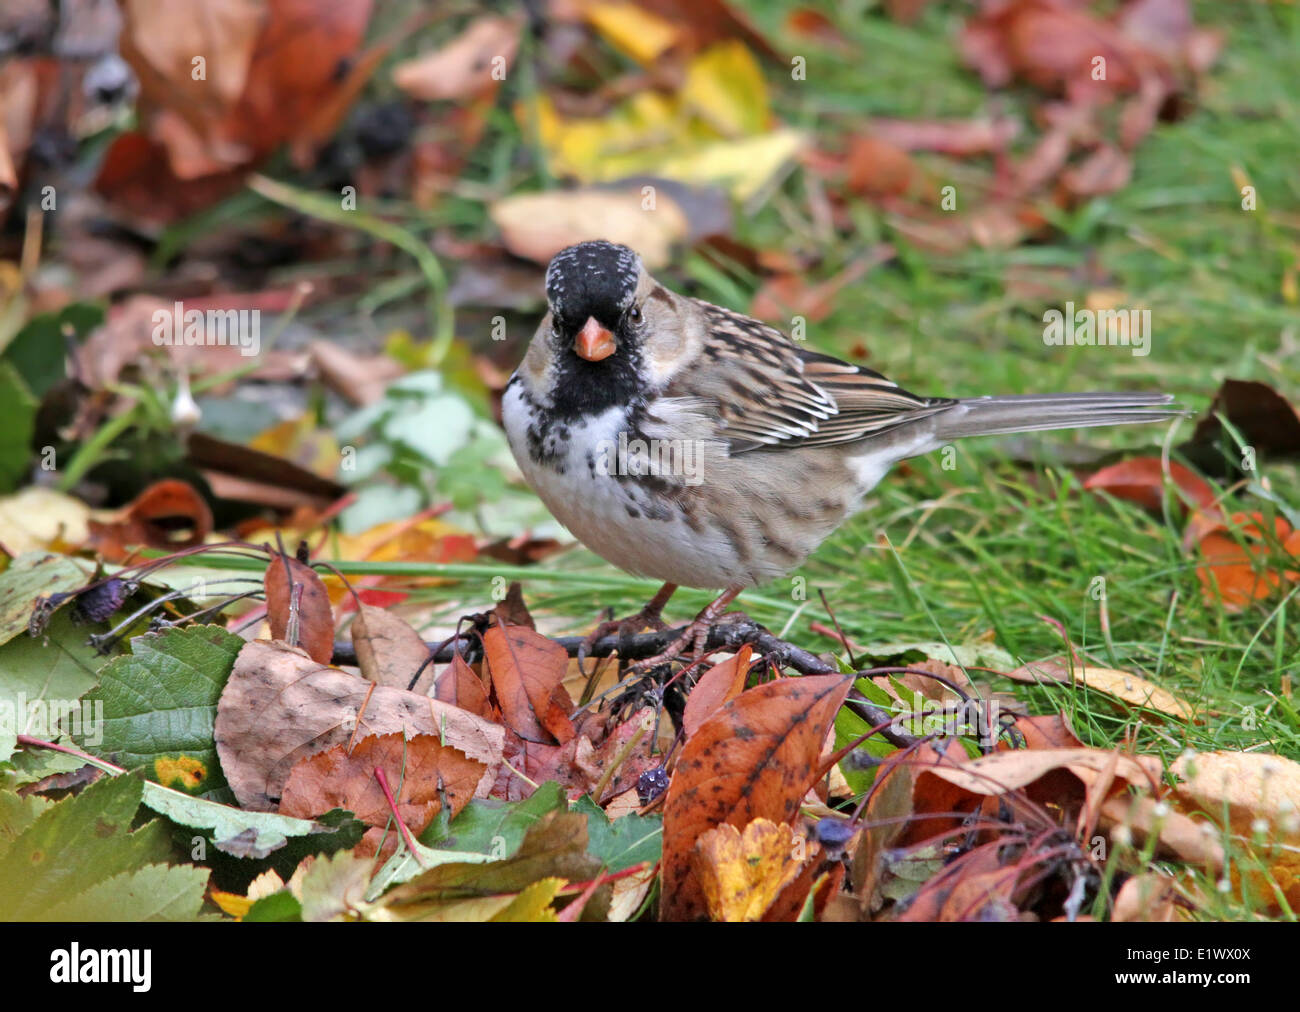 Harris's Sparrow, Zonotrichia querula, on a lawn with fall leaves, in Saskatchewan, Canada Stock Photo